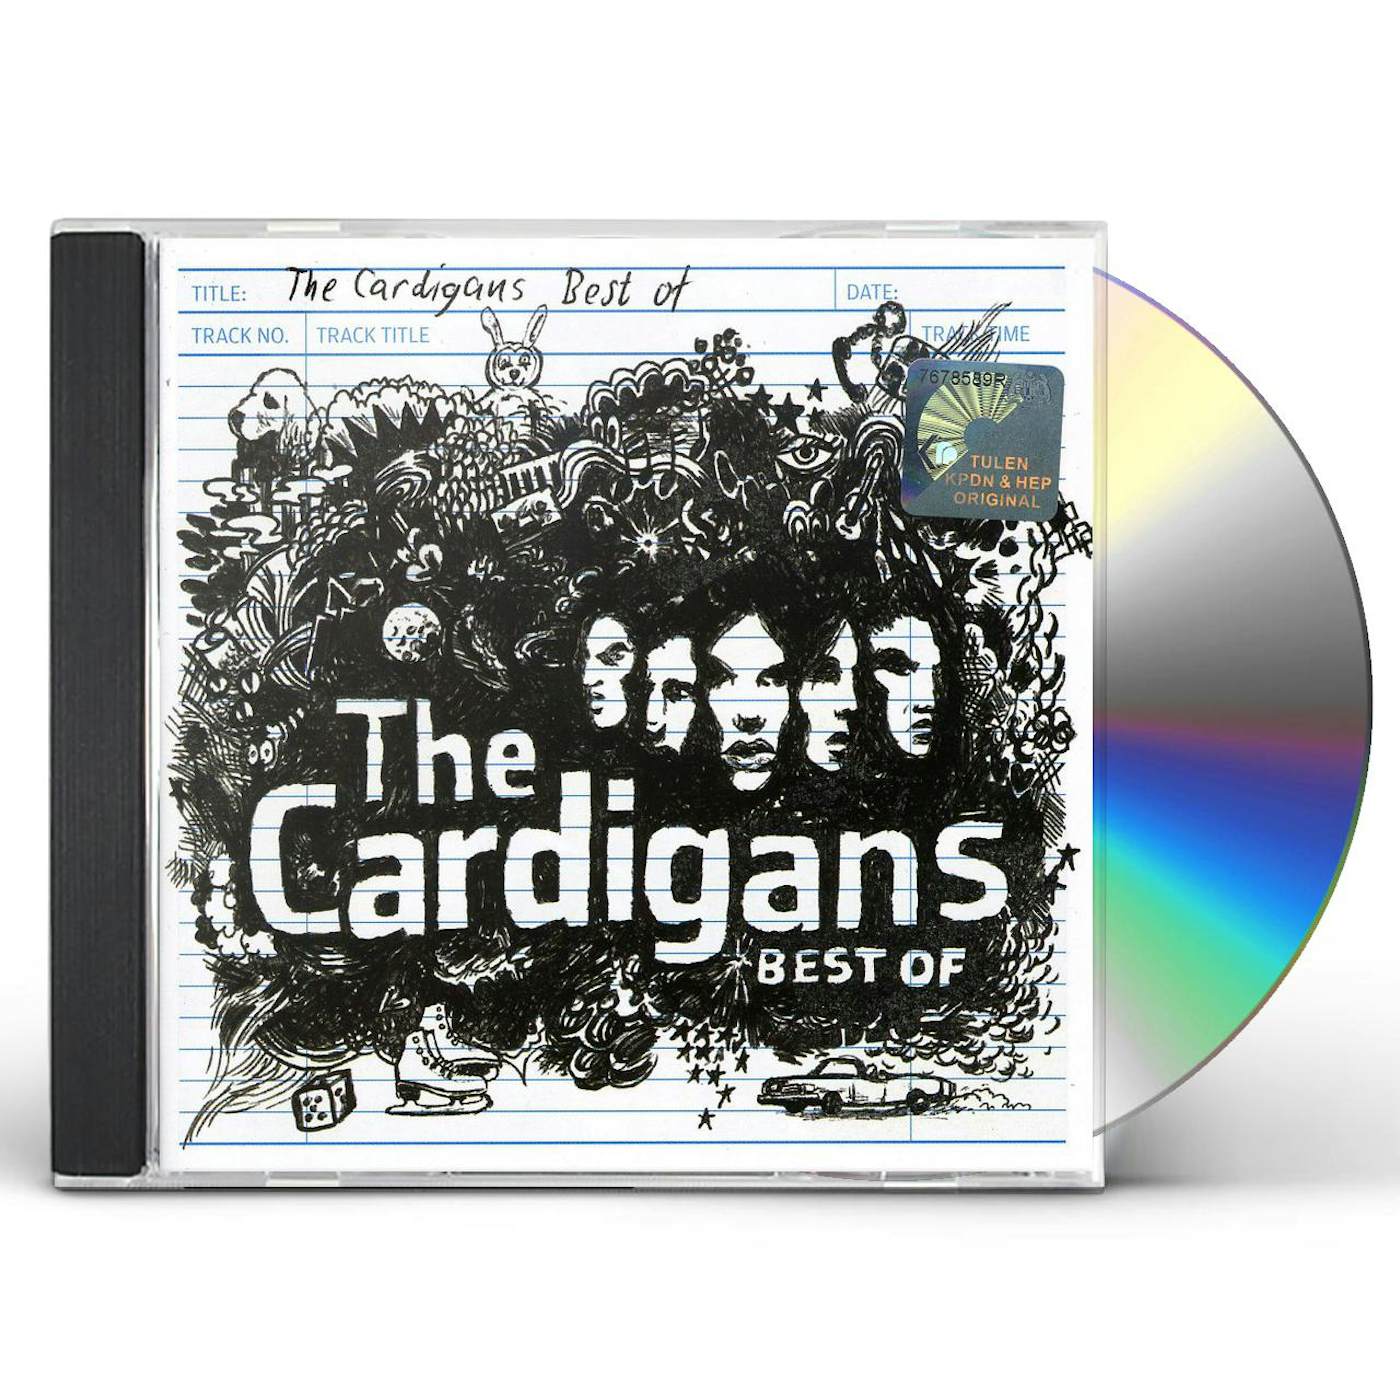 The Cardigans BEST OF CD